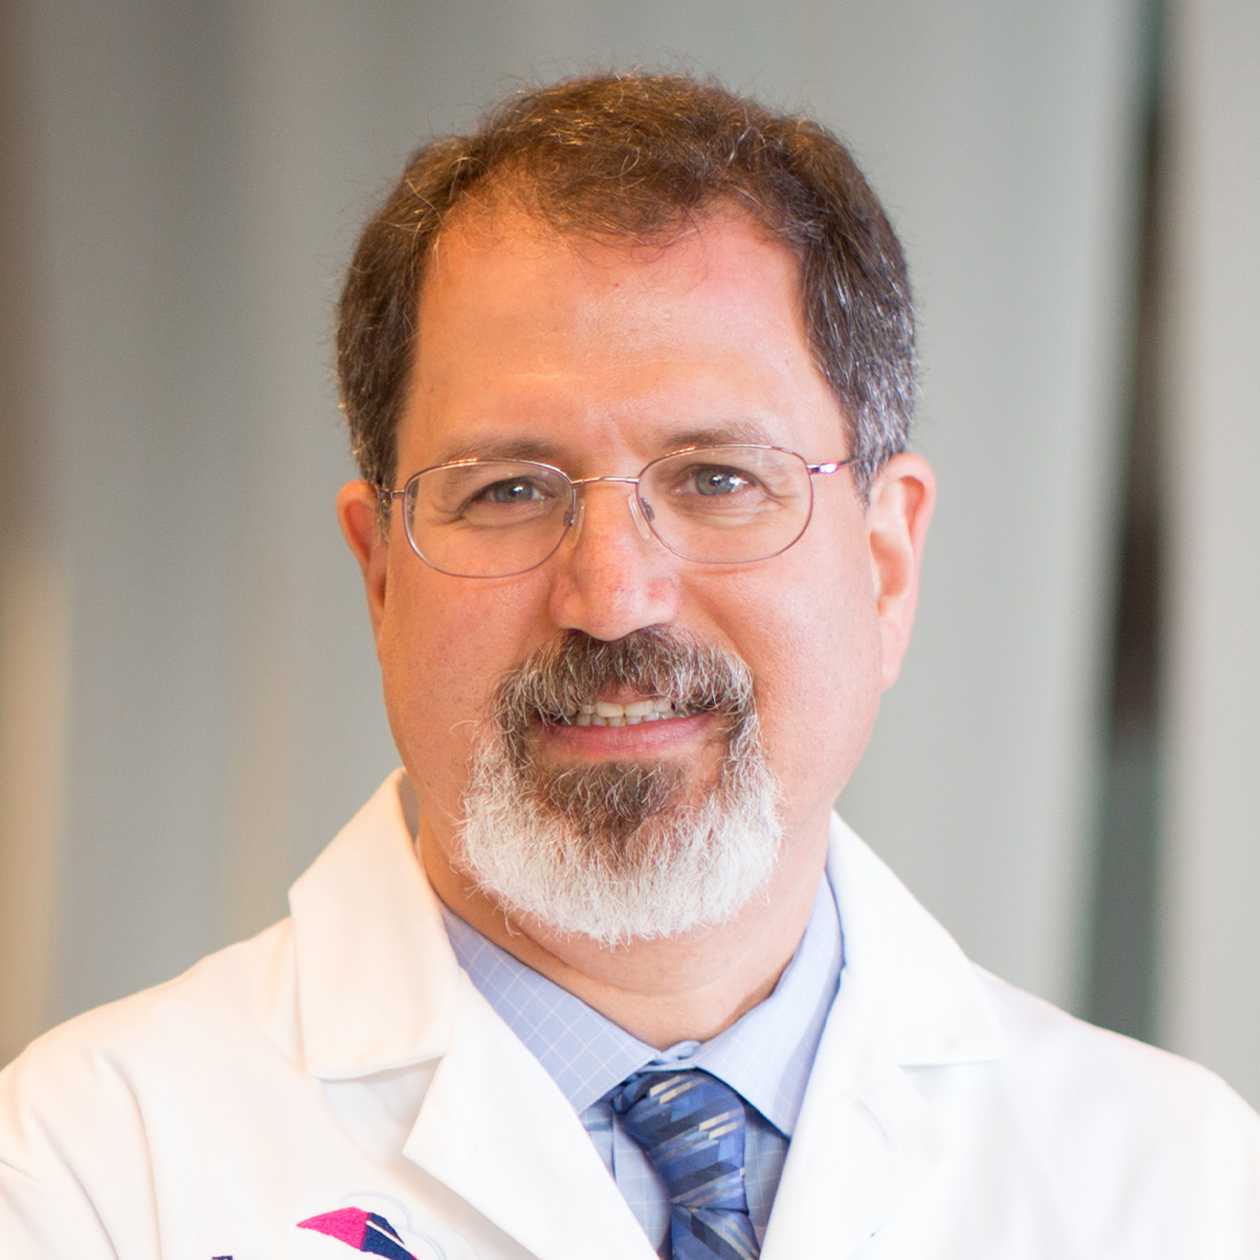 Dr. David Loeb Awarded Department of Defense Grant for Pioneering Ewing Sarcoma Research